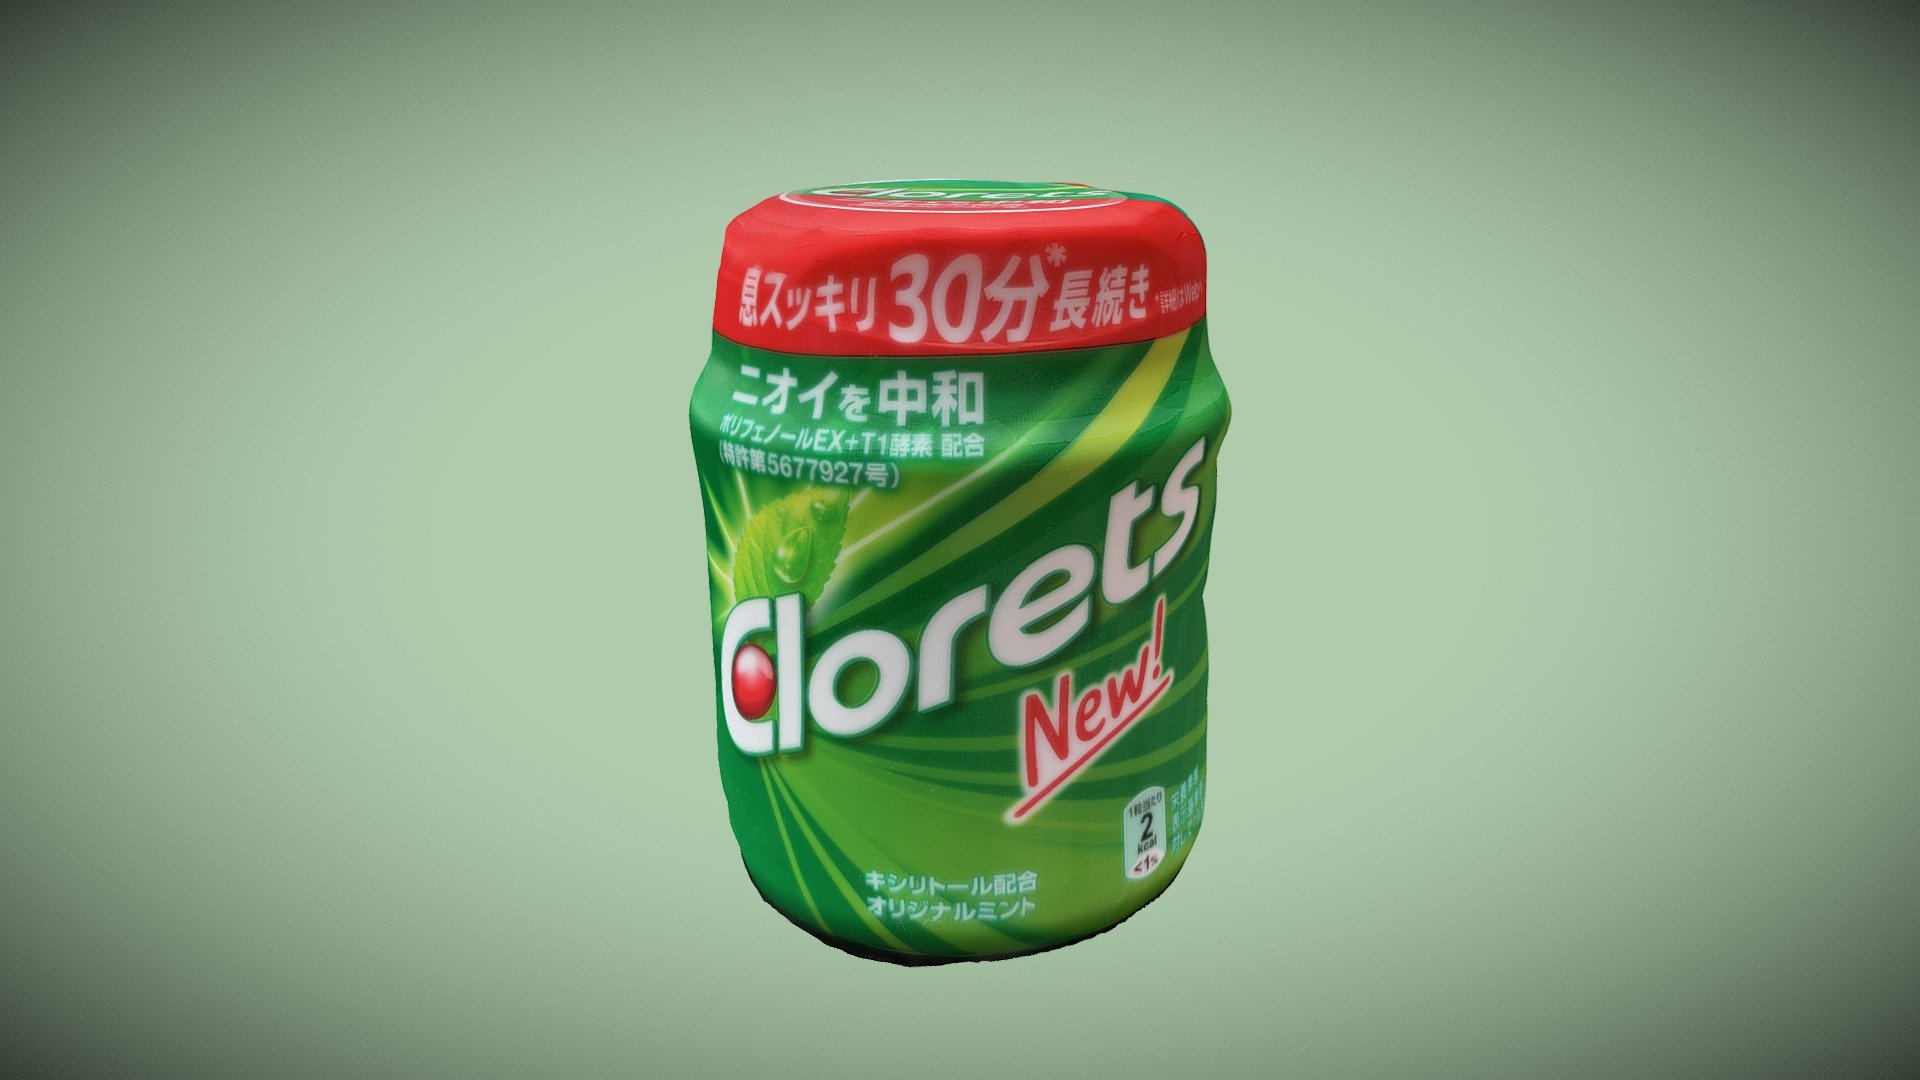 68 shots from iPhoneXs processed with Metashape
Just bought that gum bax for my long travels by car from Kyoto to Hyogo - Gum - 3D model by Koto3D Stephane Vogley (@sayavog) 3d model